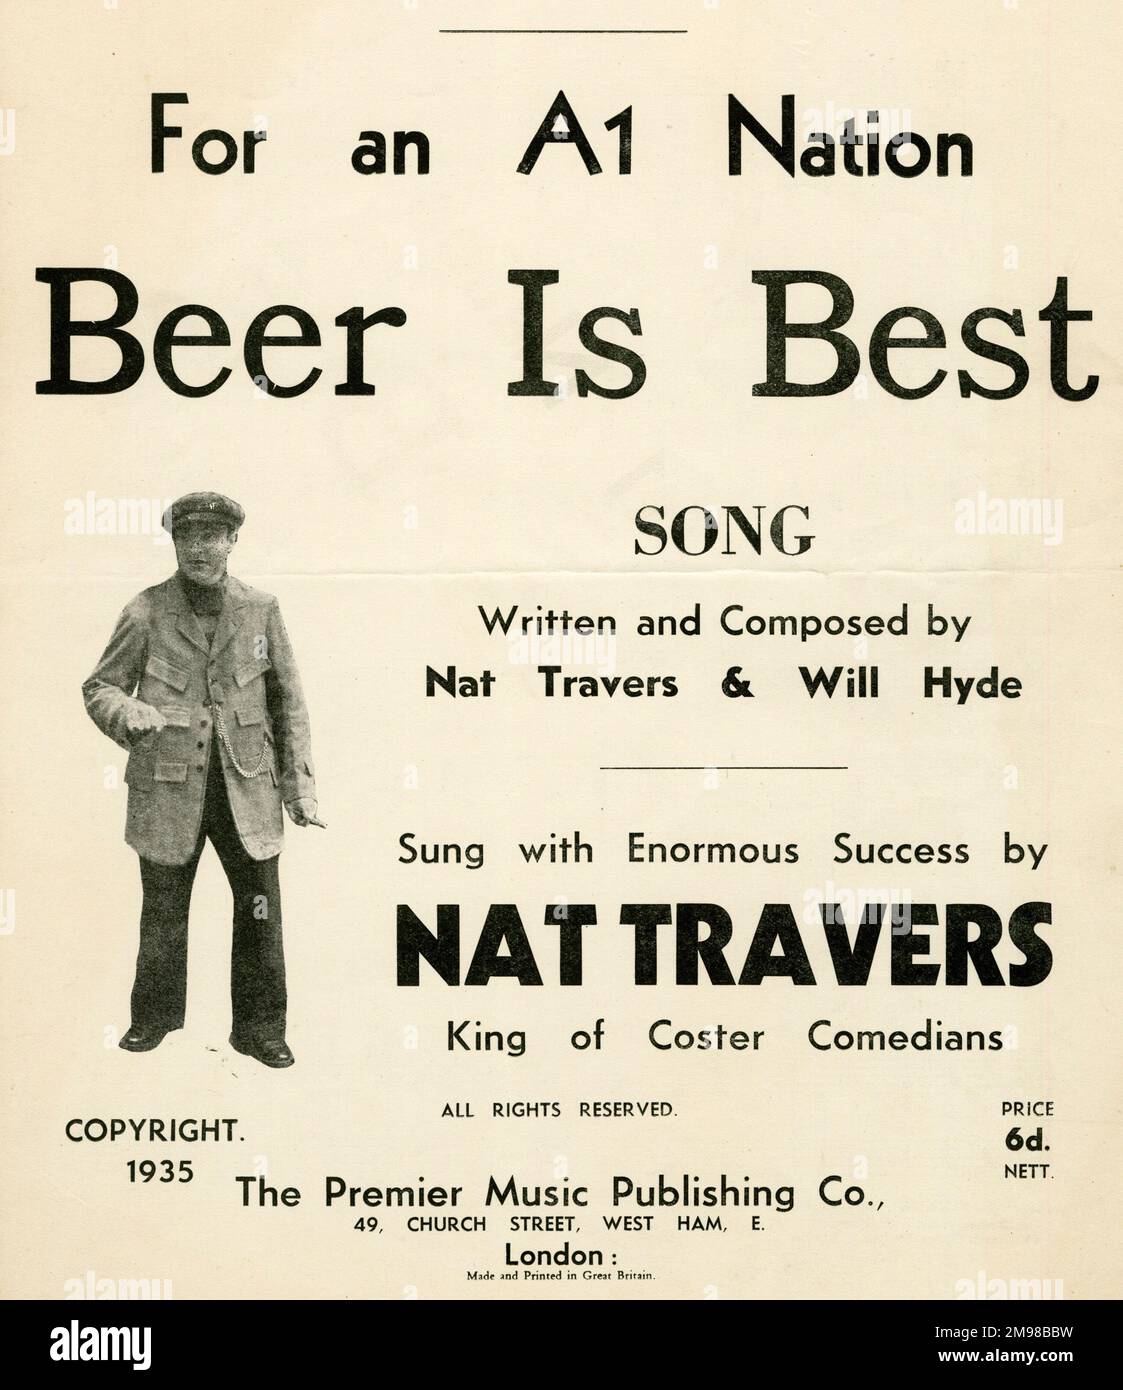 Musikcover, for an A1 Nation Beer is Best, Words and music von Nat Travers und will Hyde, aufgeführt von Nat Travers, King of Coster Comedians. Stockfoto